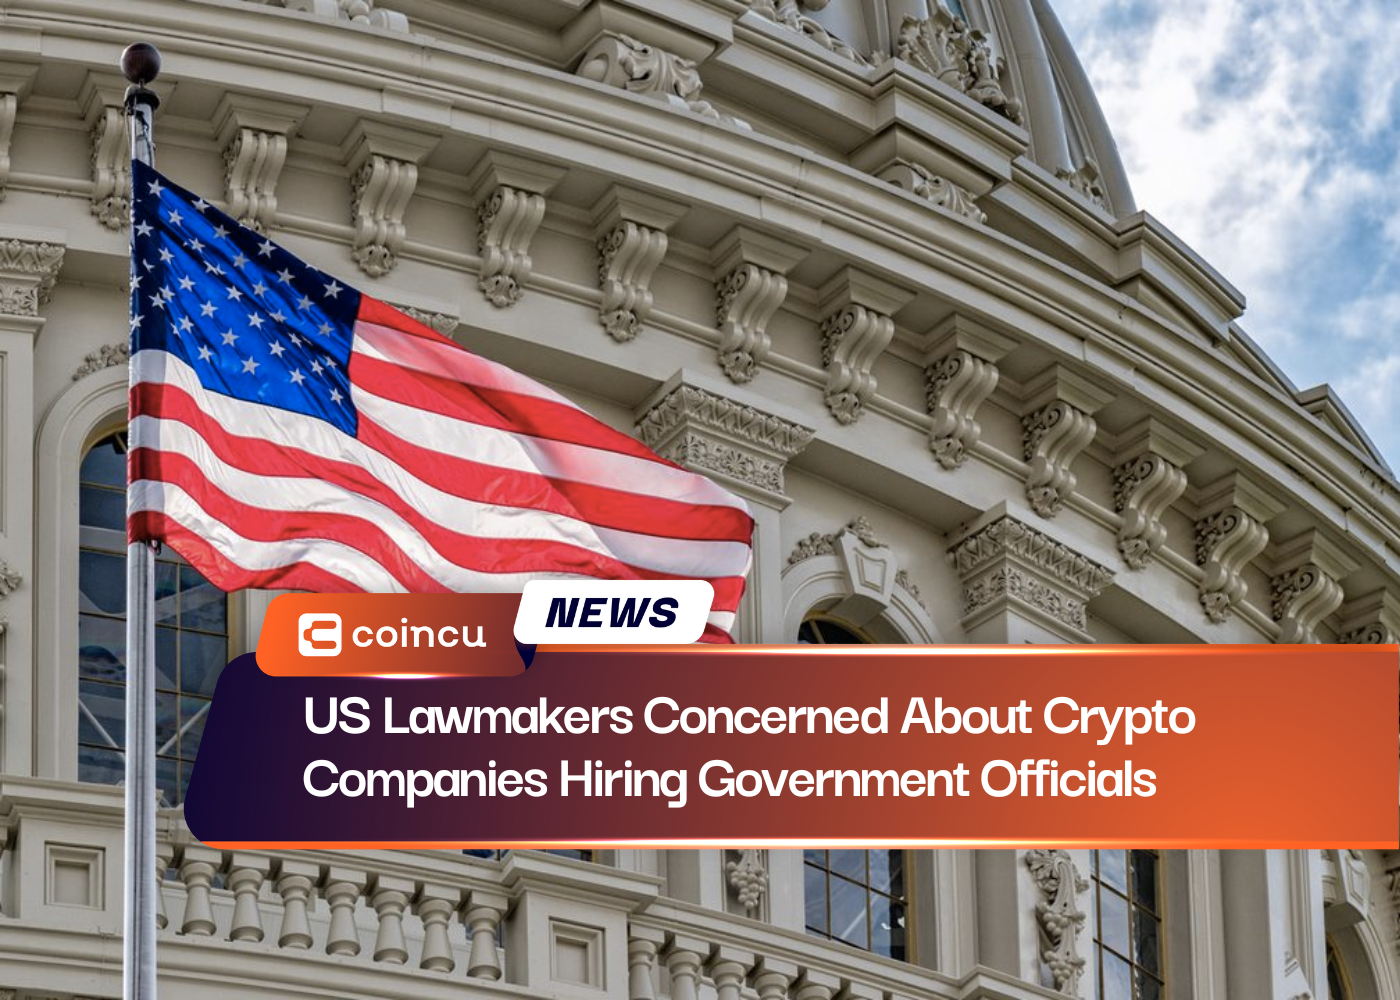 US Lawmakers Concerned About Crypto Companies Hiring Government Officials